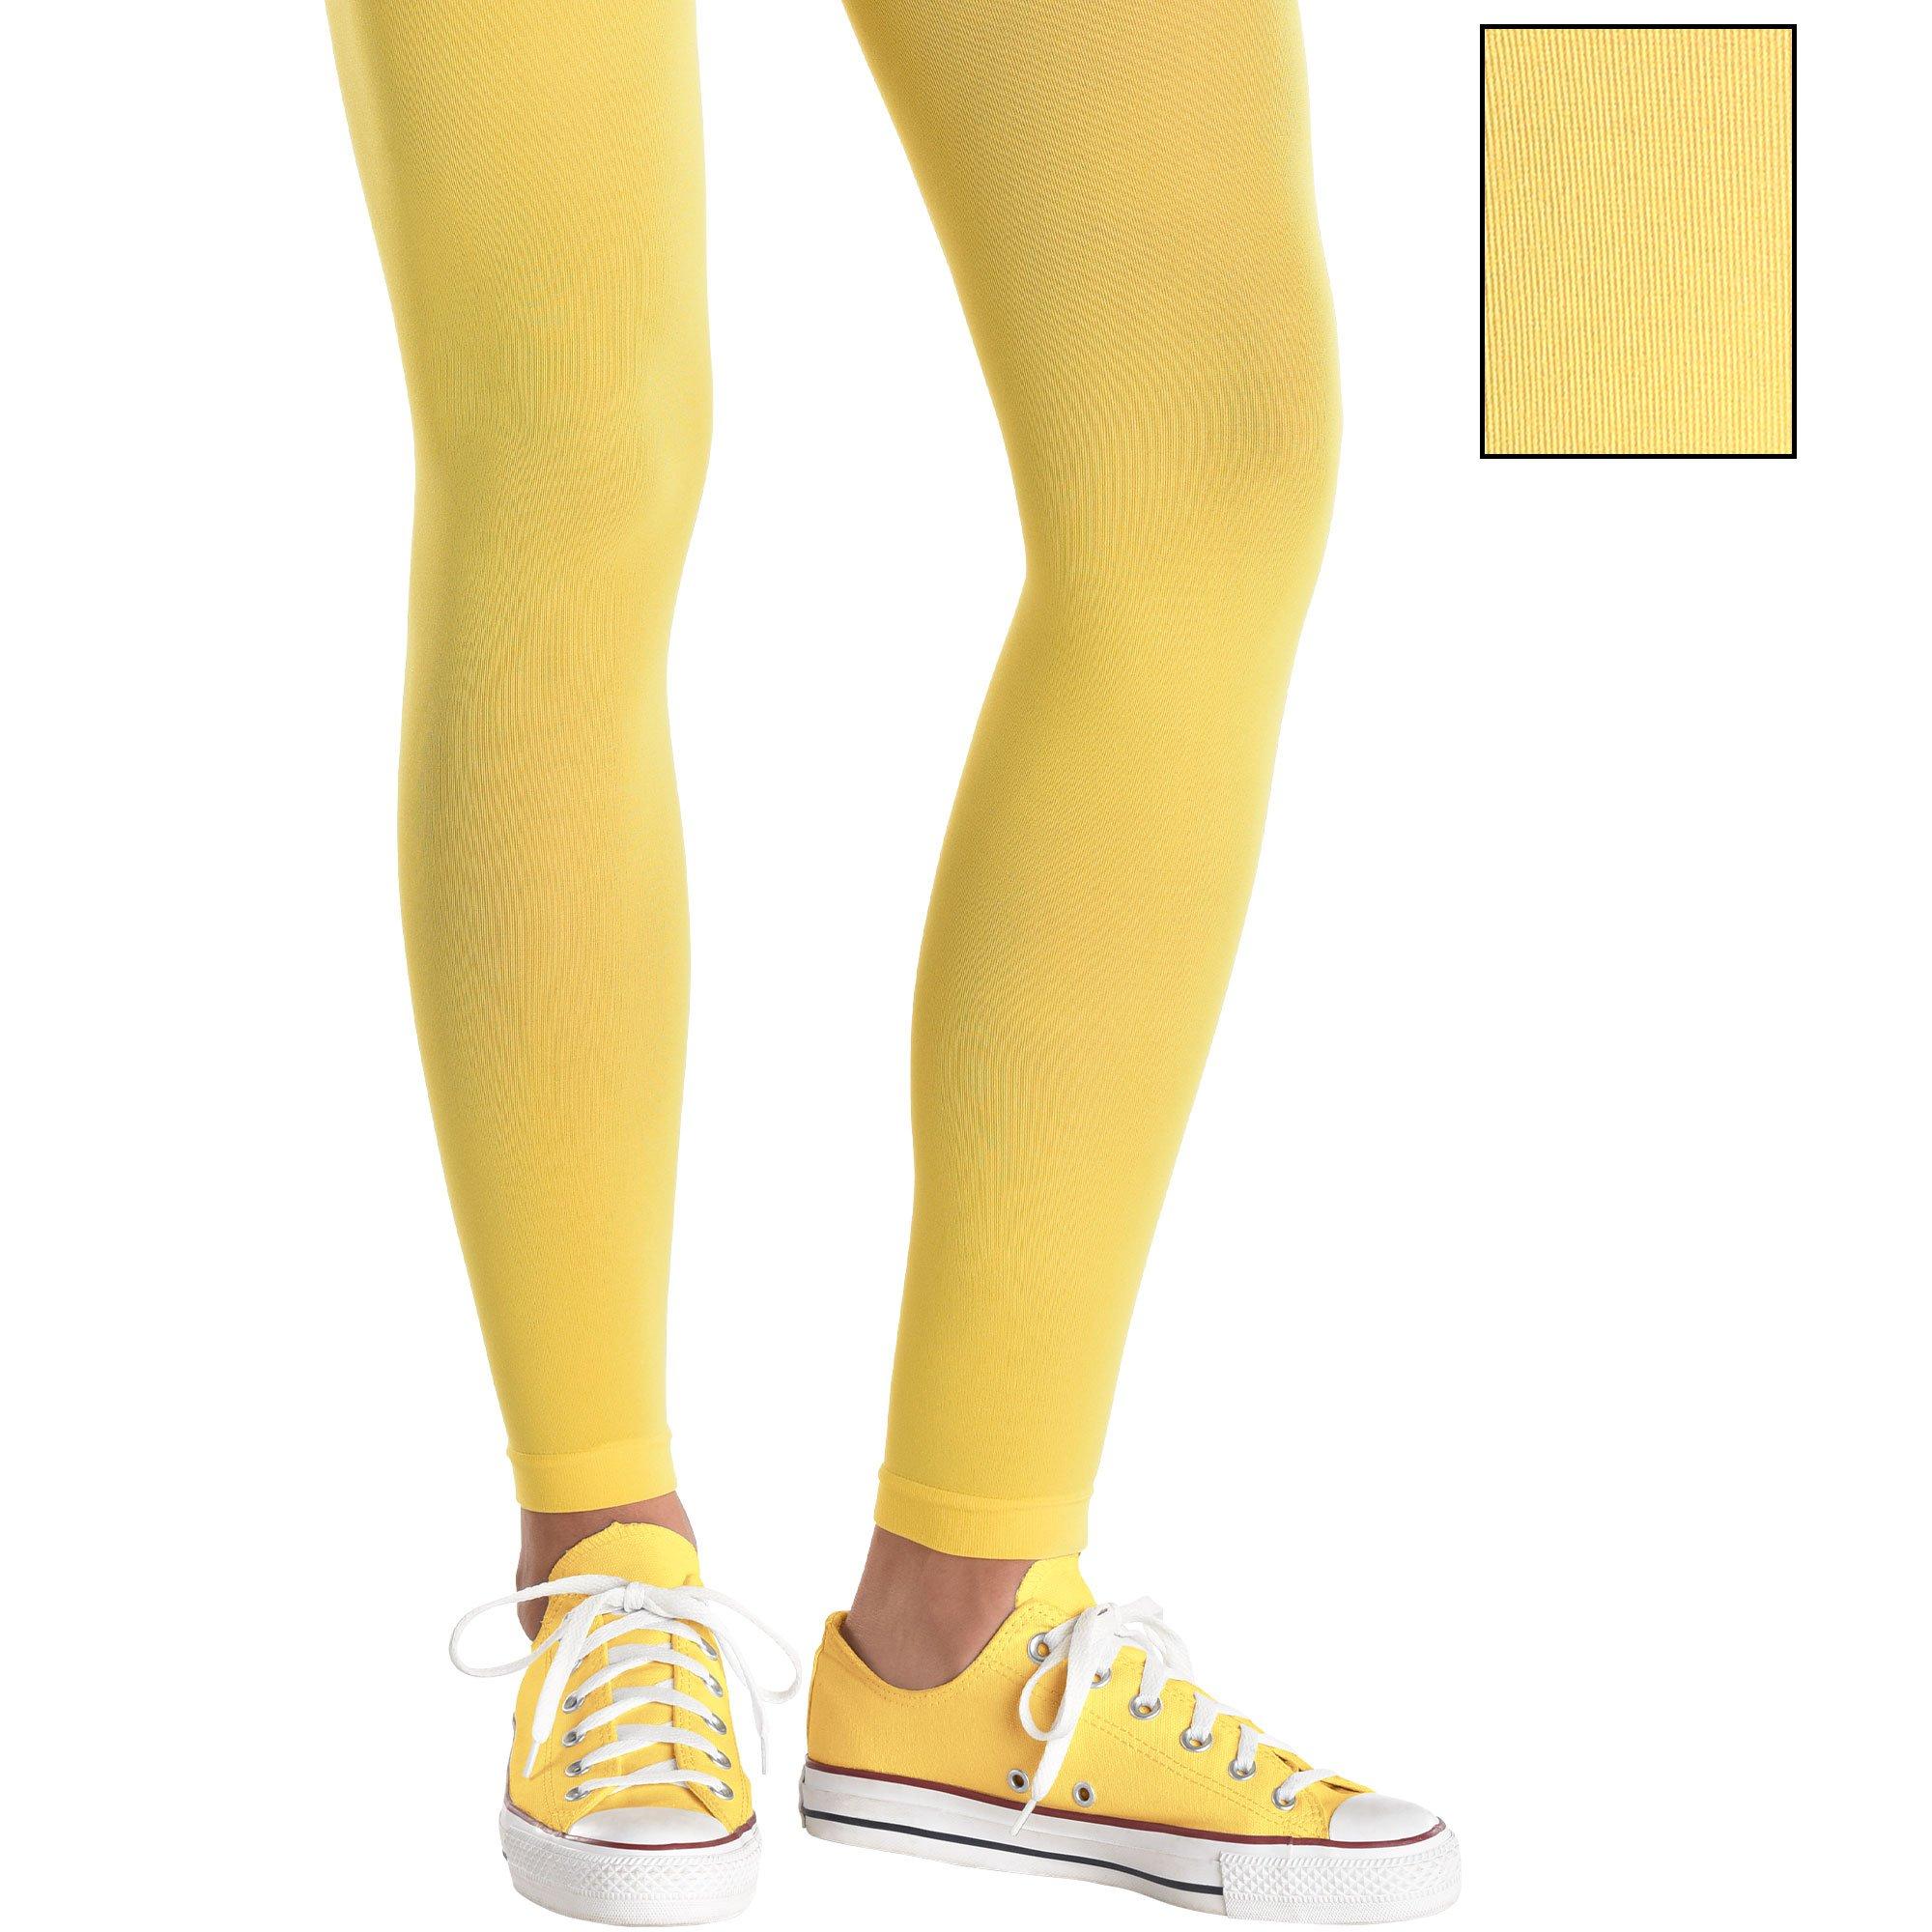 Yellow Opaque Girl's Tights